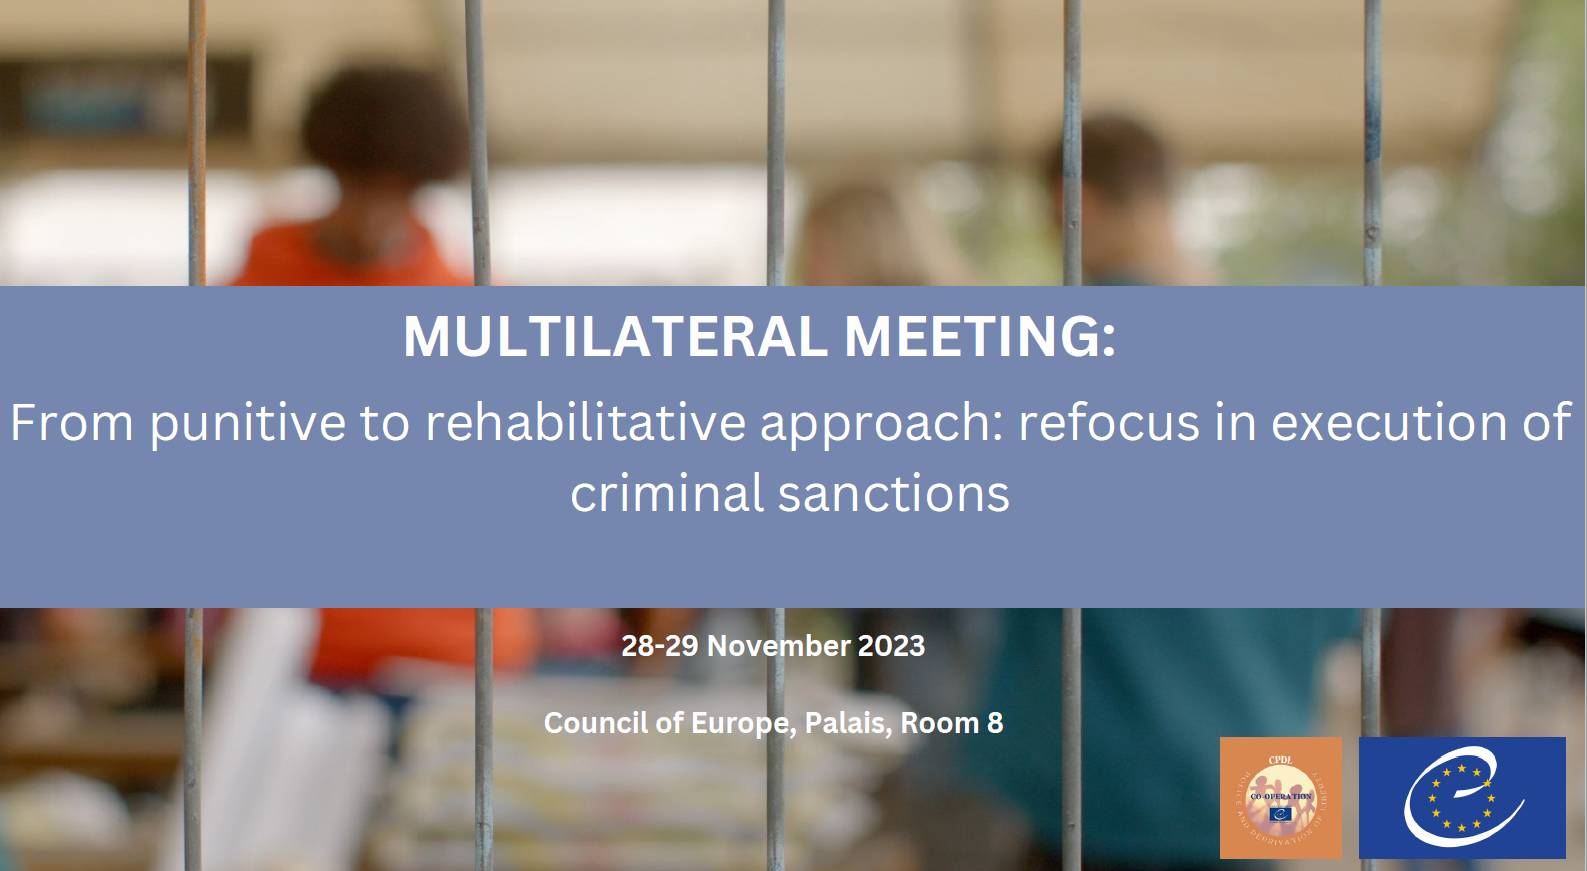 Execution of criminal sanctions: refocus from punitive to rehabilitative approach